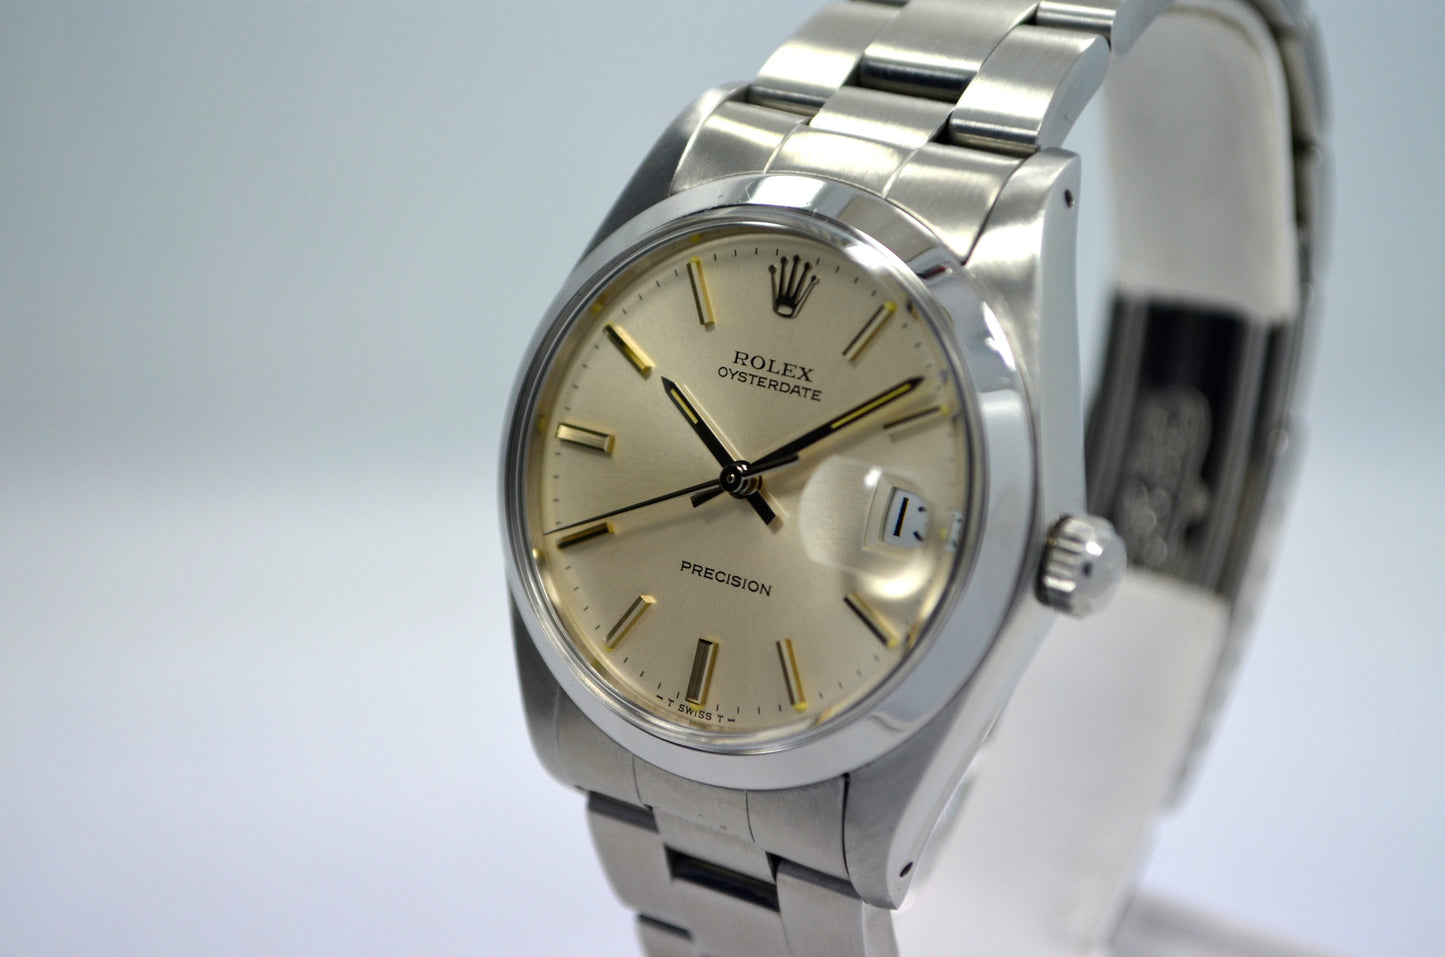 Vintage Rolex 6694 Oysterdate Stainless Steel Wristwatch Circa 1983 8 Mil Serial - Hashtag Watch Company